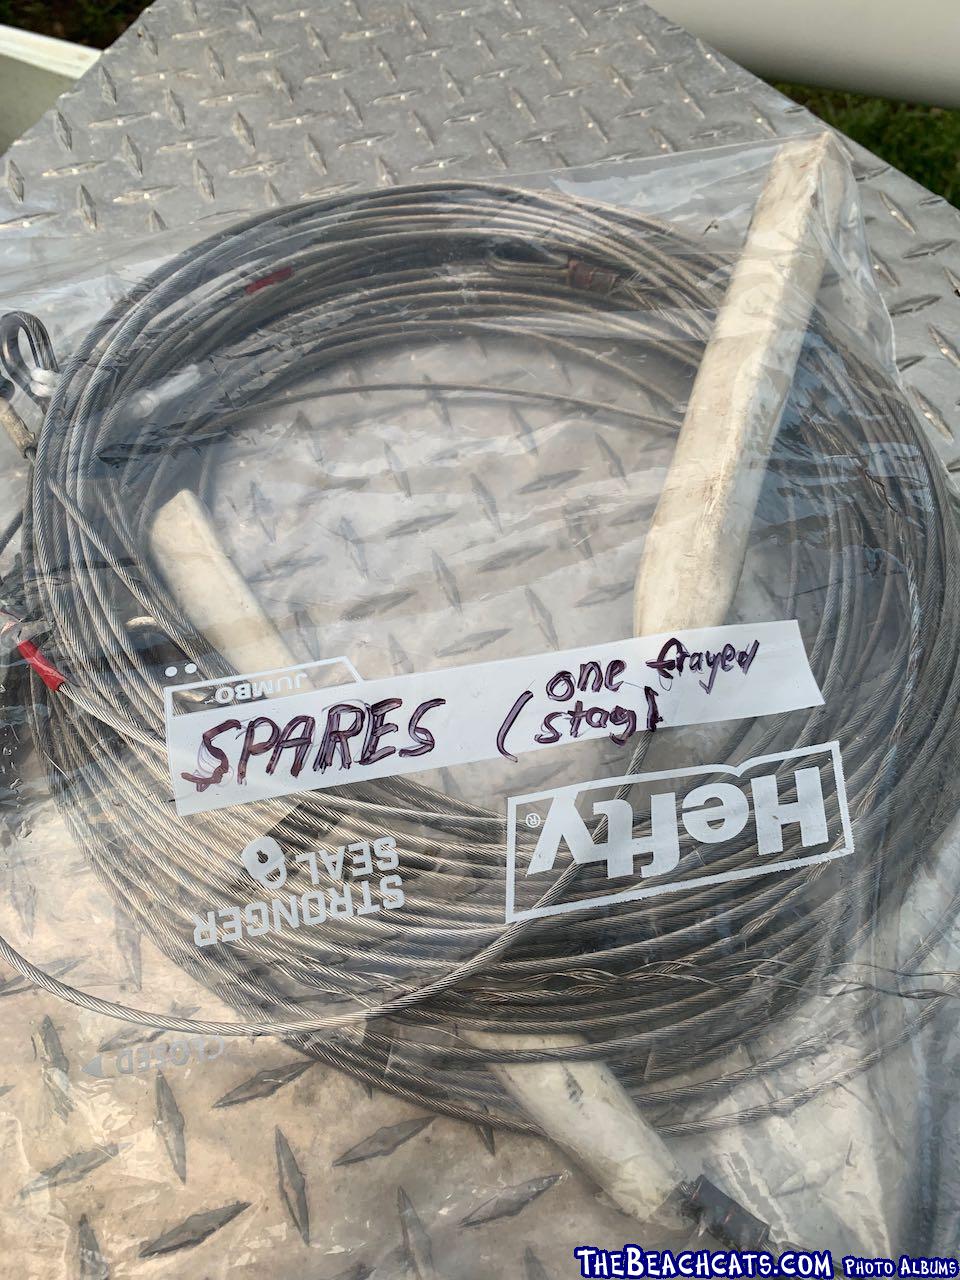 15 - Spare wires